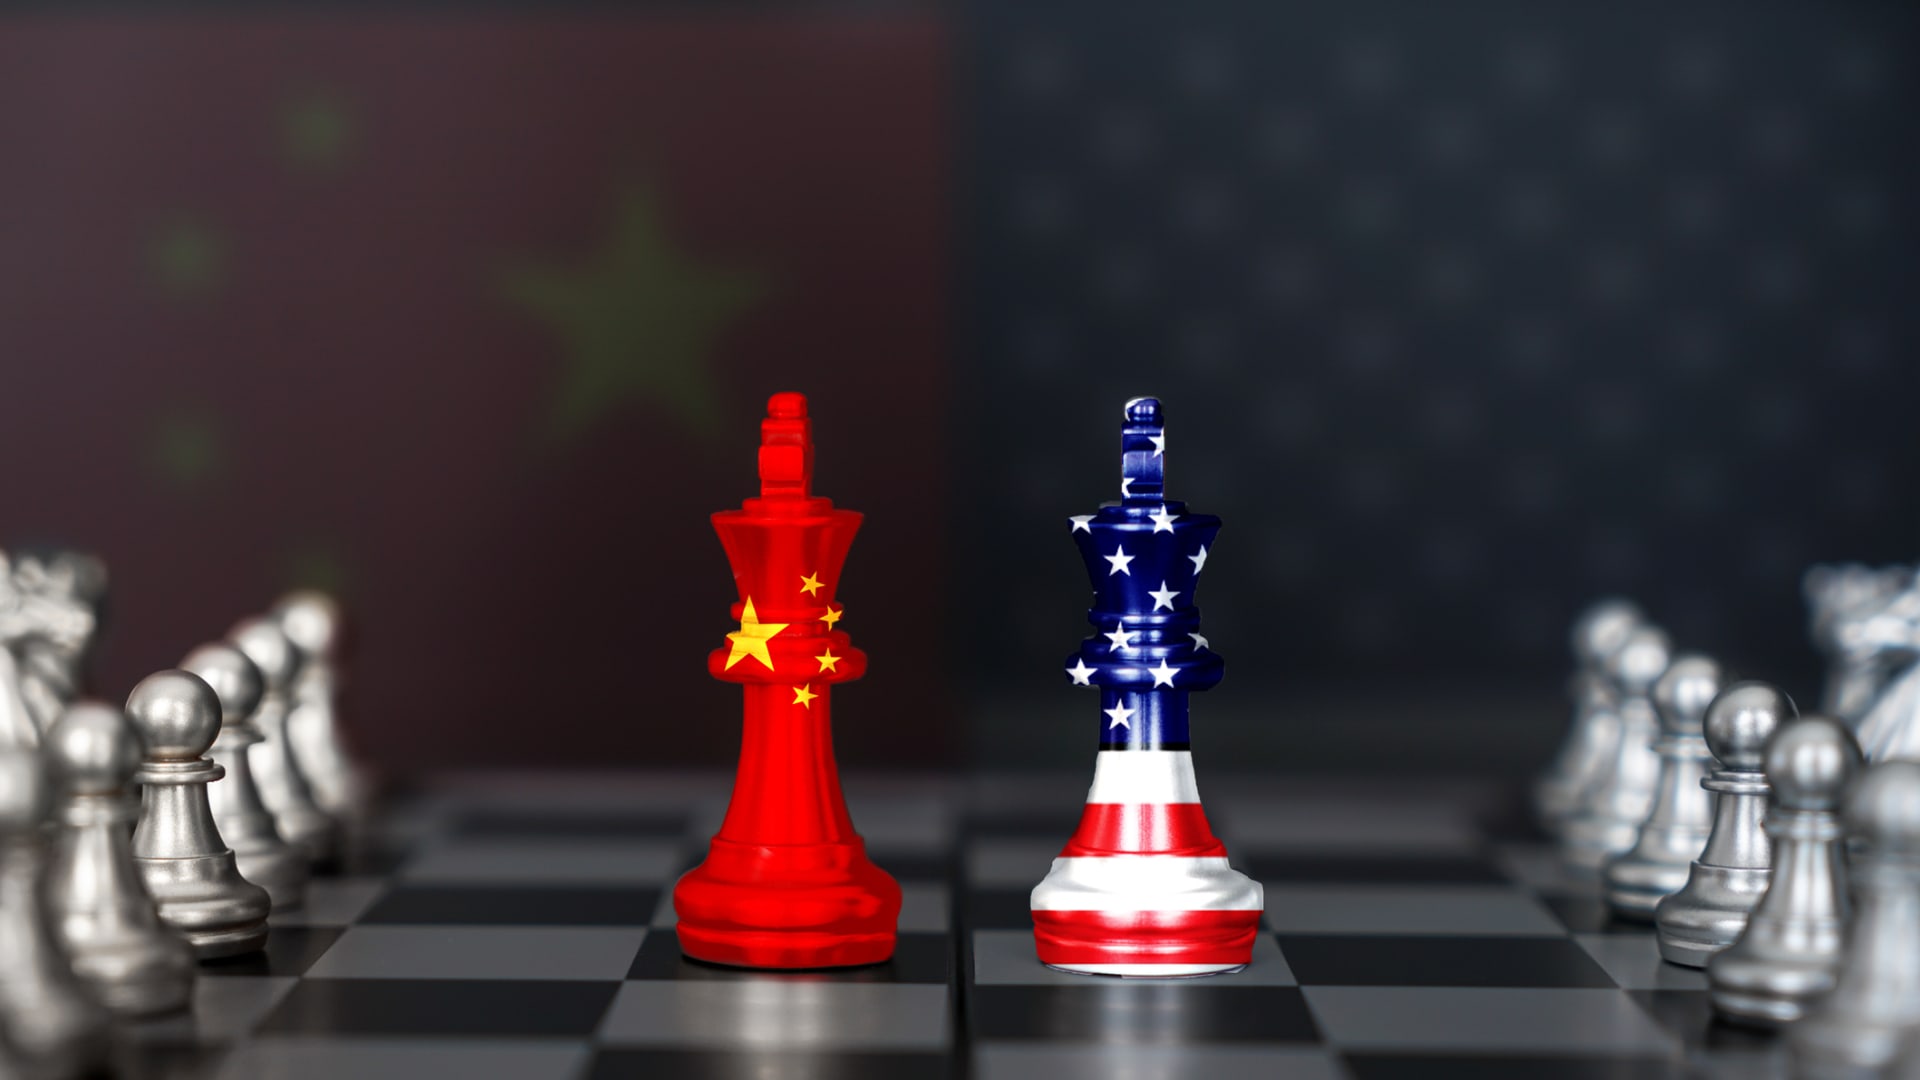 U.S. curbs on China to rise, with ‘decoupling’ in full force, expert warns